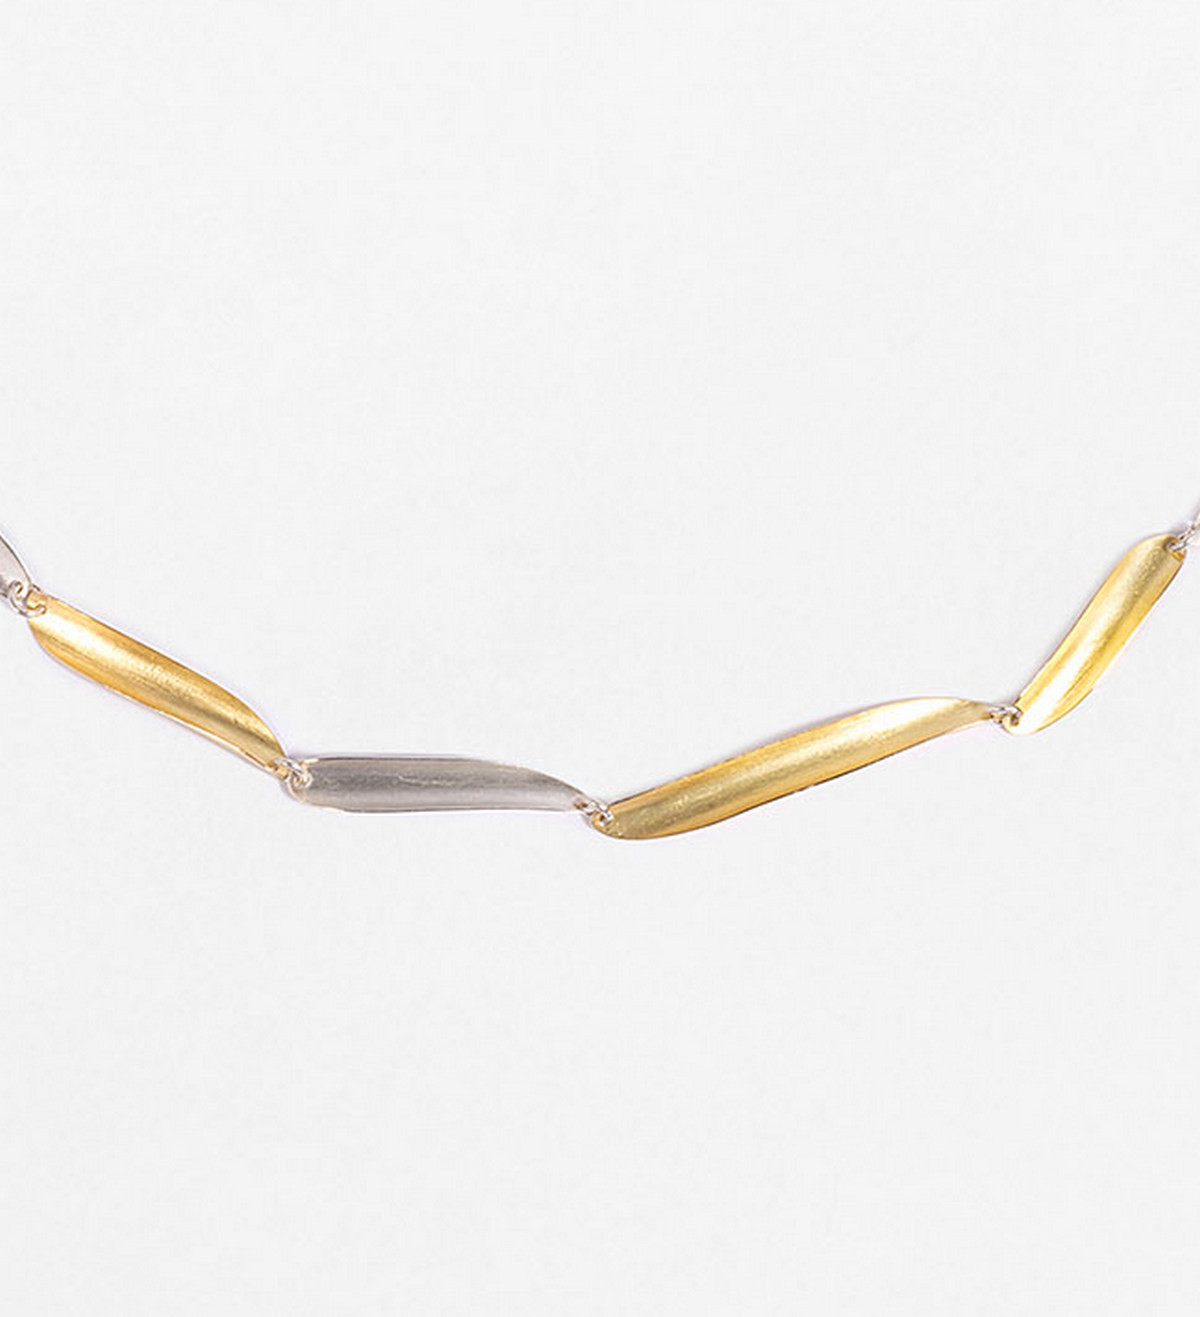 Volta silver and gold necklace 43cm